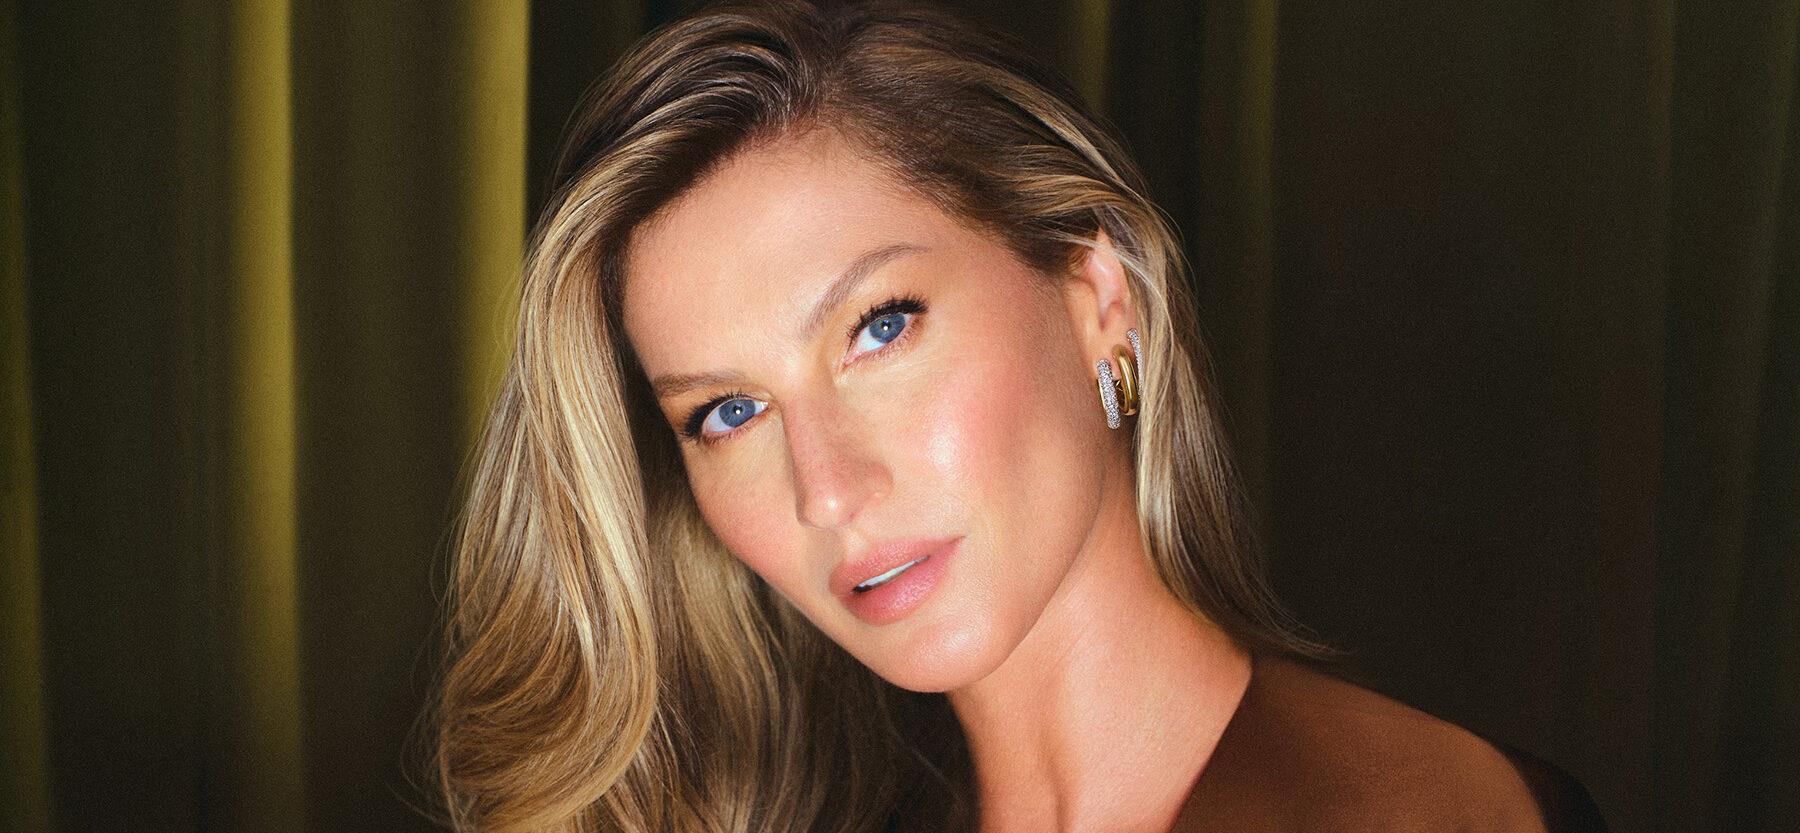 Gisele Bündchen Says She Cured Her Panic Attacks With One Simple Change